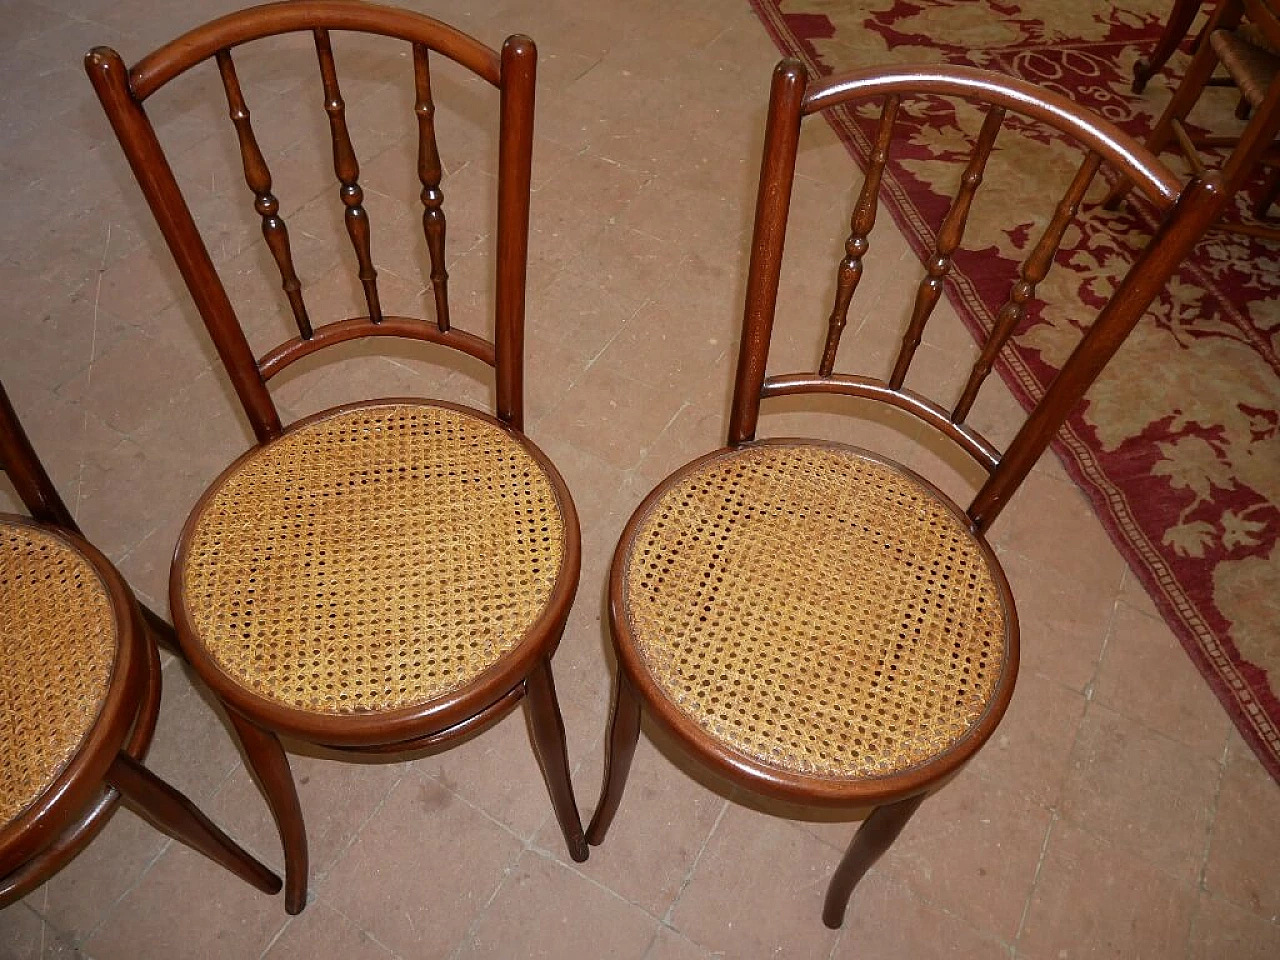 Series of 4 chairs marked with the brand J & J Kohn Wien Austria, beginning 20th century 1324149